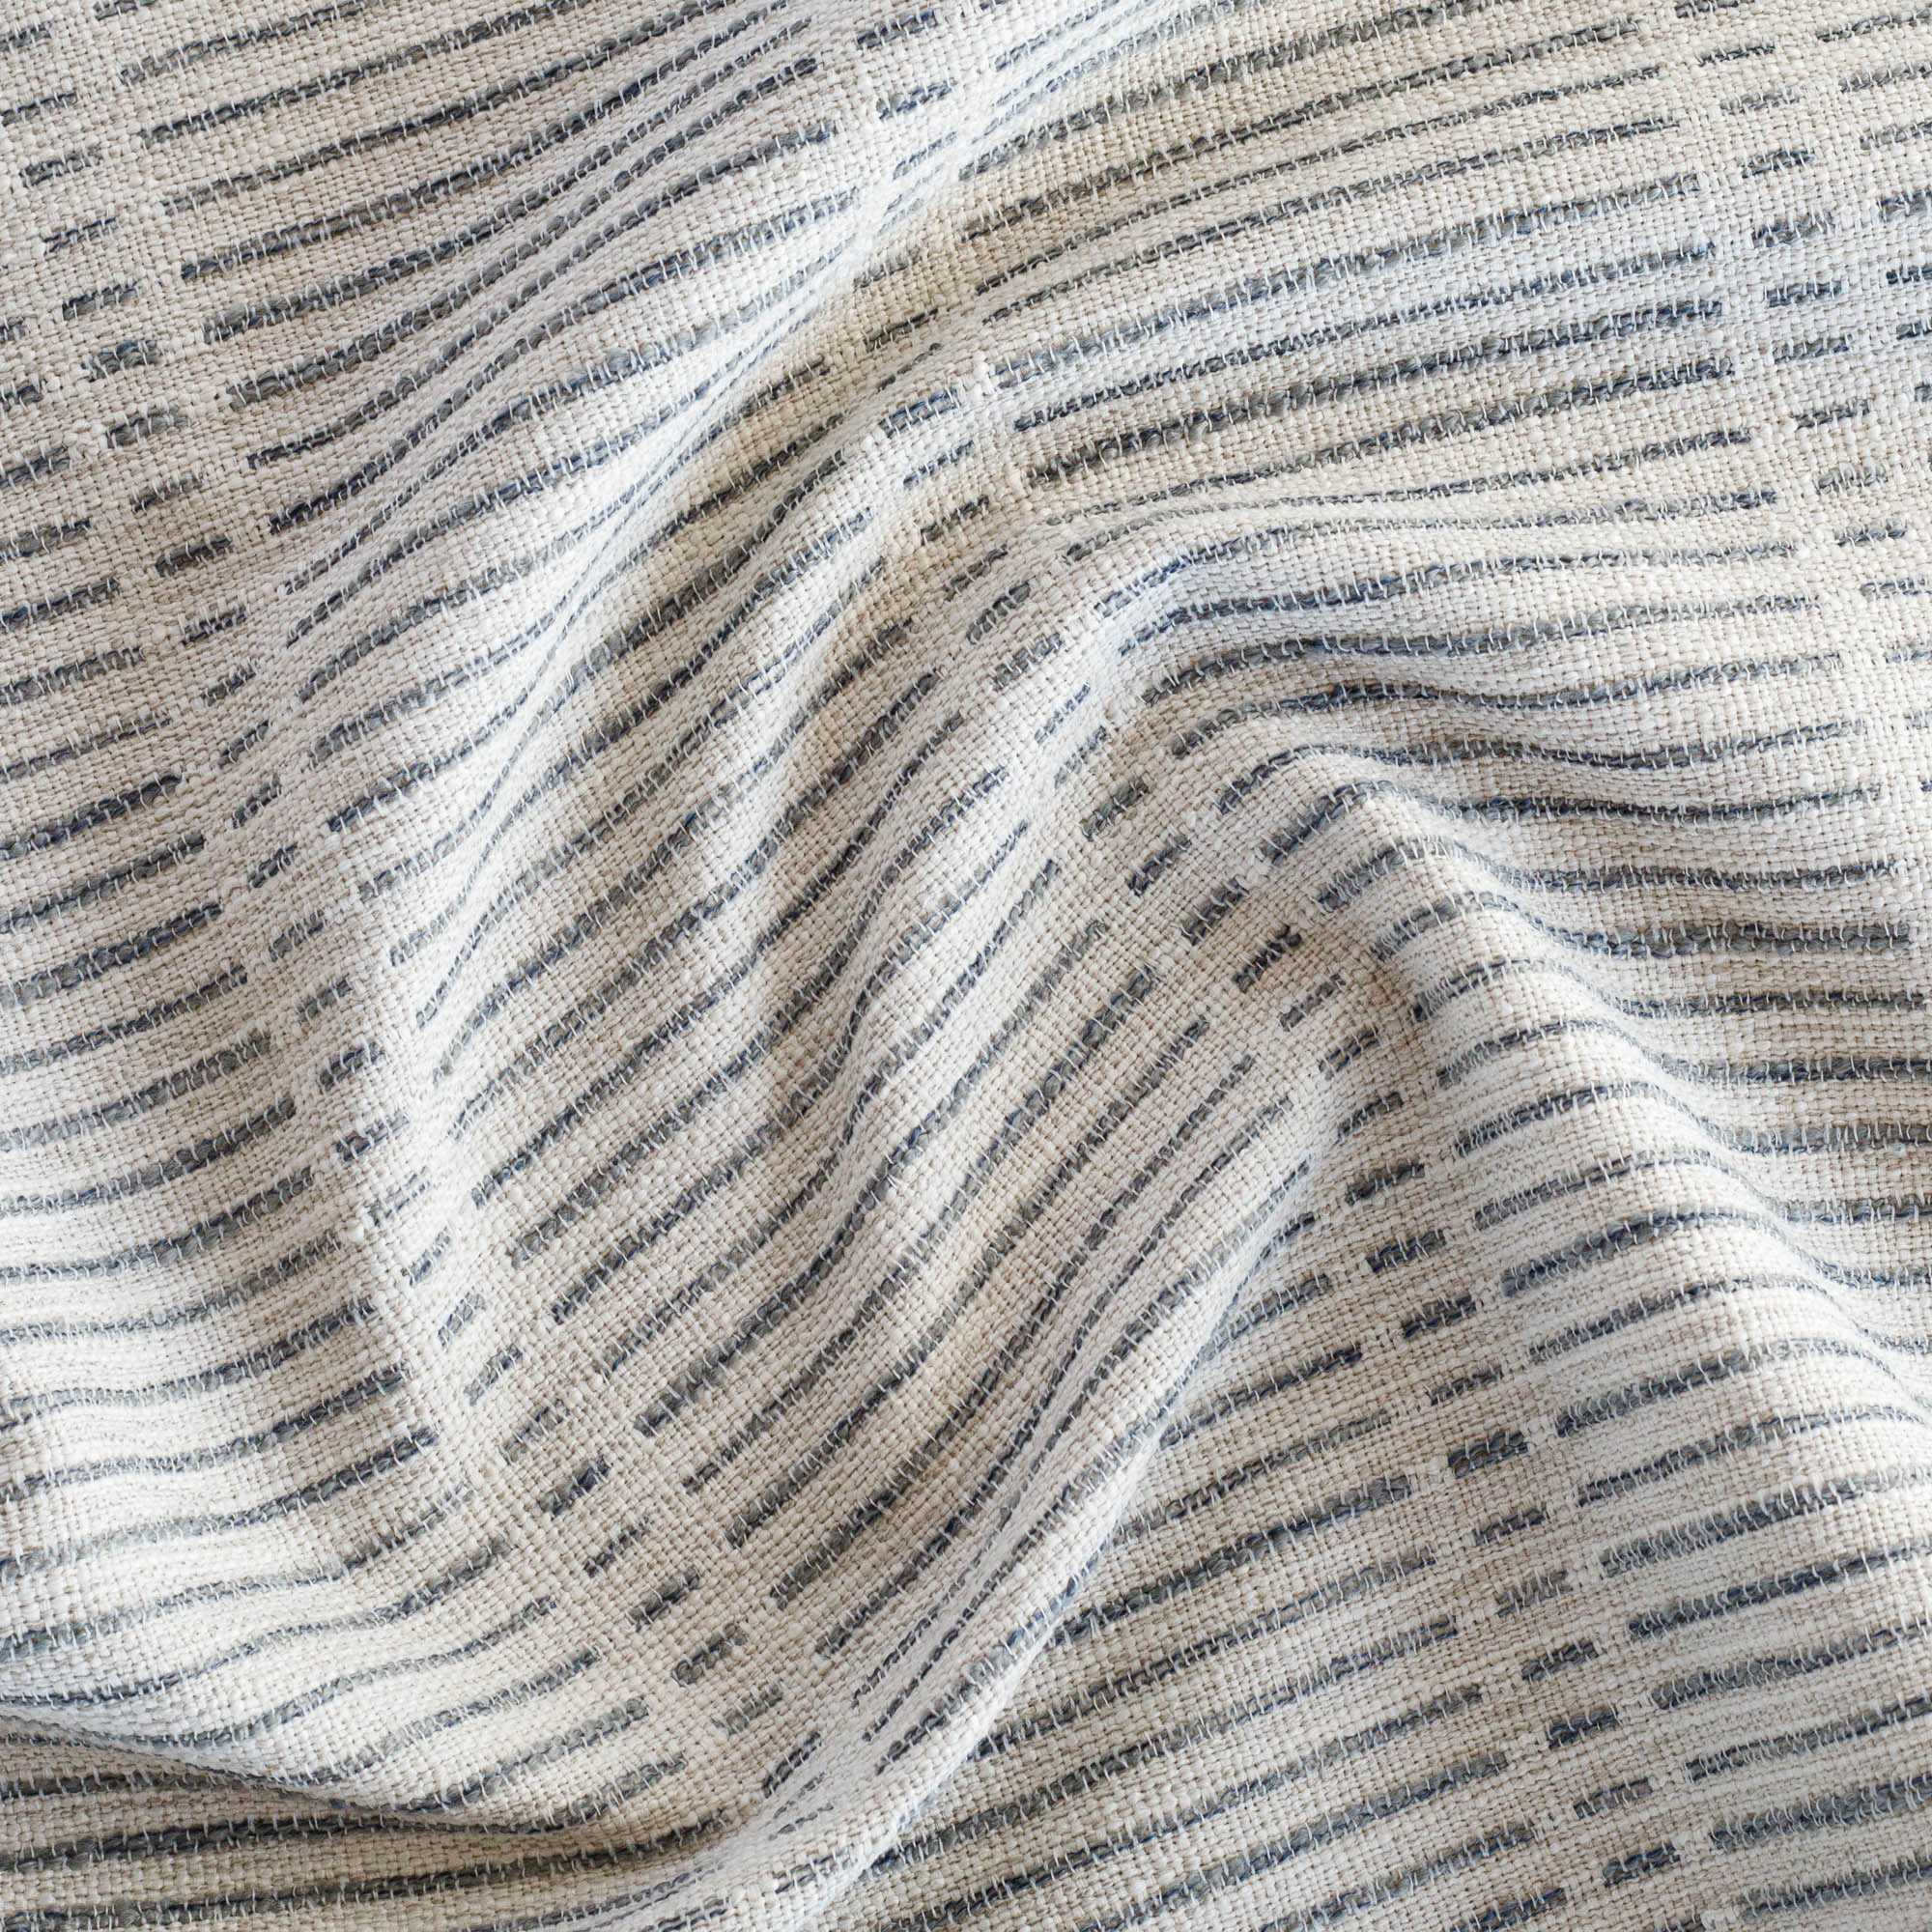 a woven light beige and blue dashed stripe patterned upholstery fabric : close up view